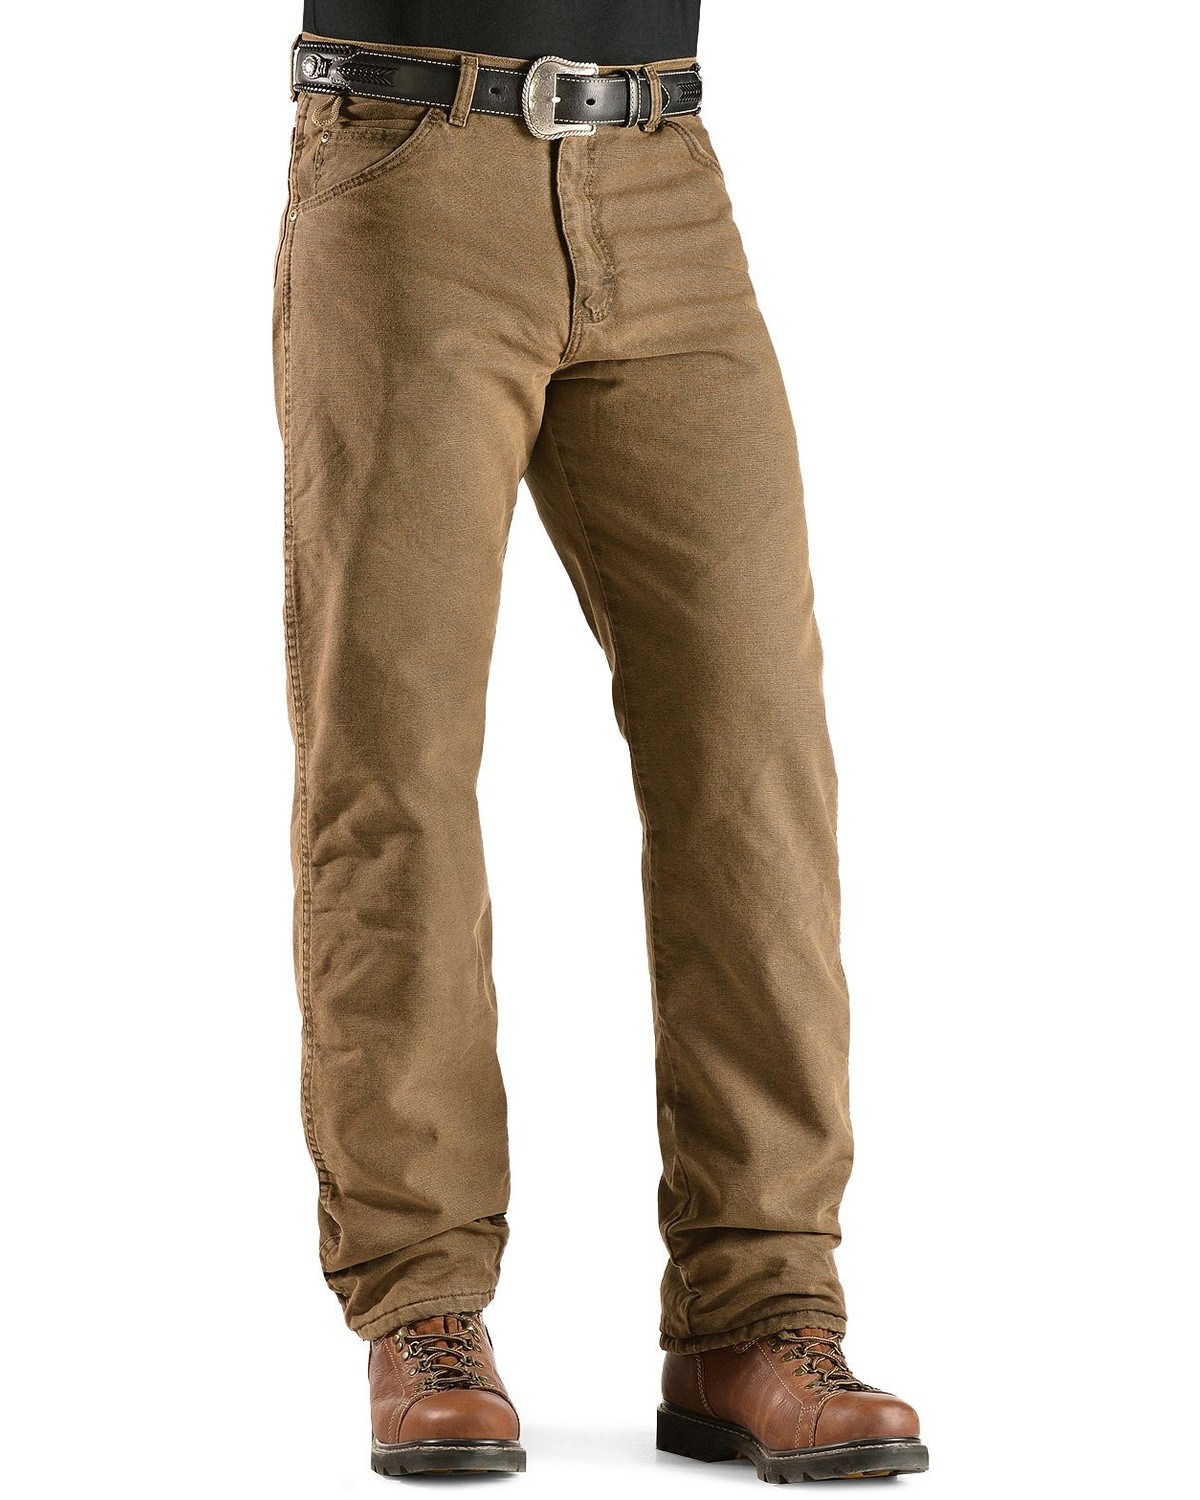 Wrangler Jeans - Rugged Wear Relaxed Fit Flannel Lined | Sheplers